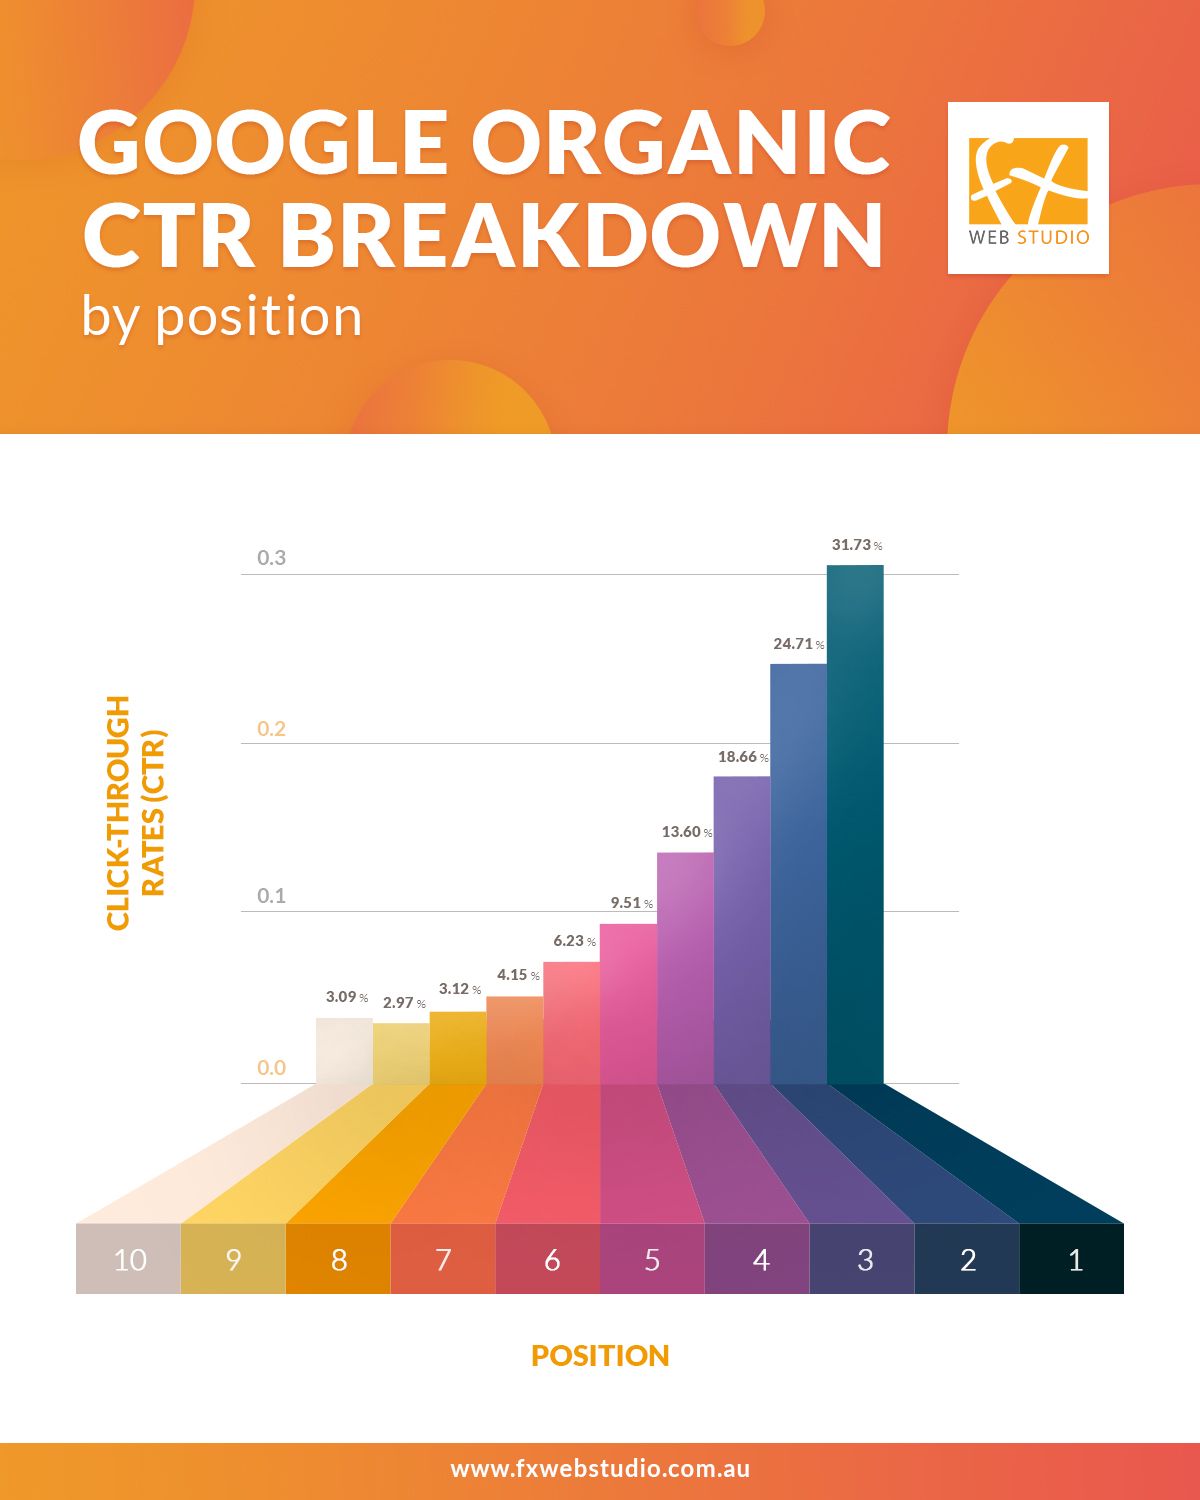 Google Organic CTR Breakdown By Position infographic